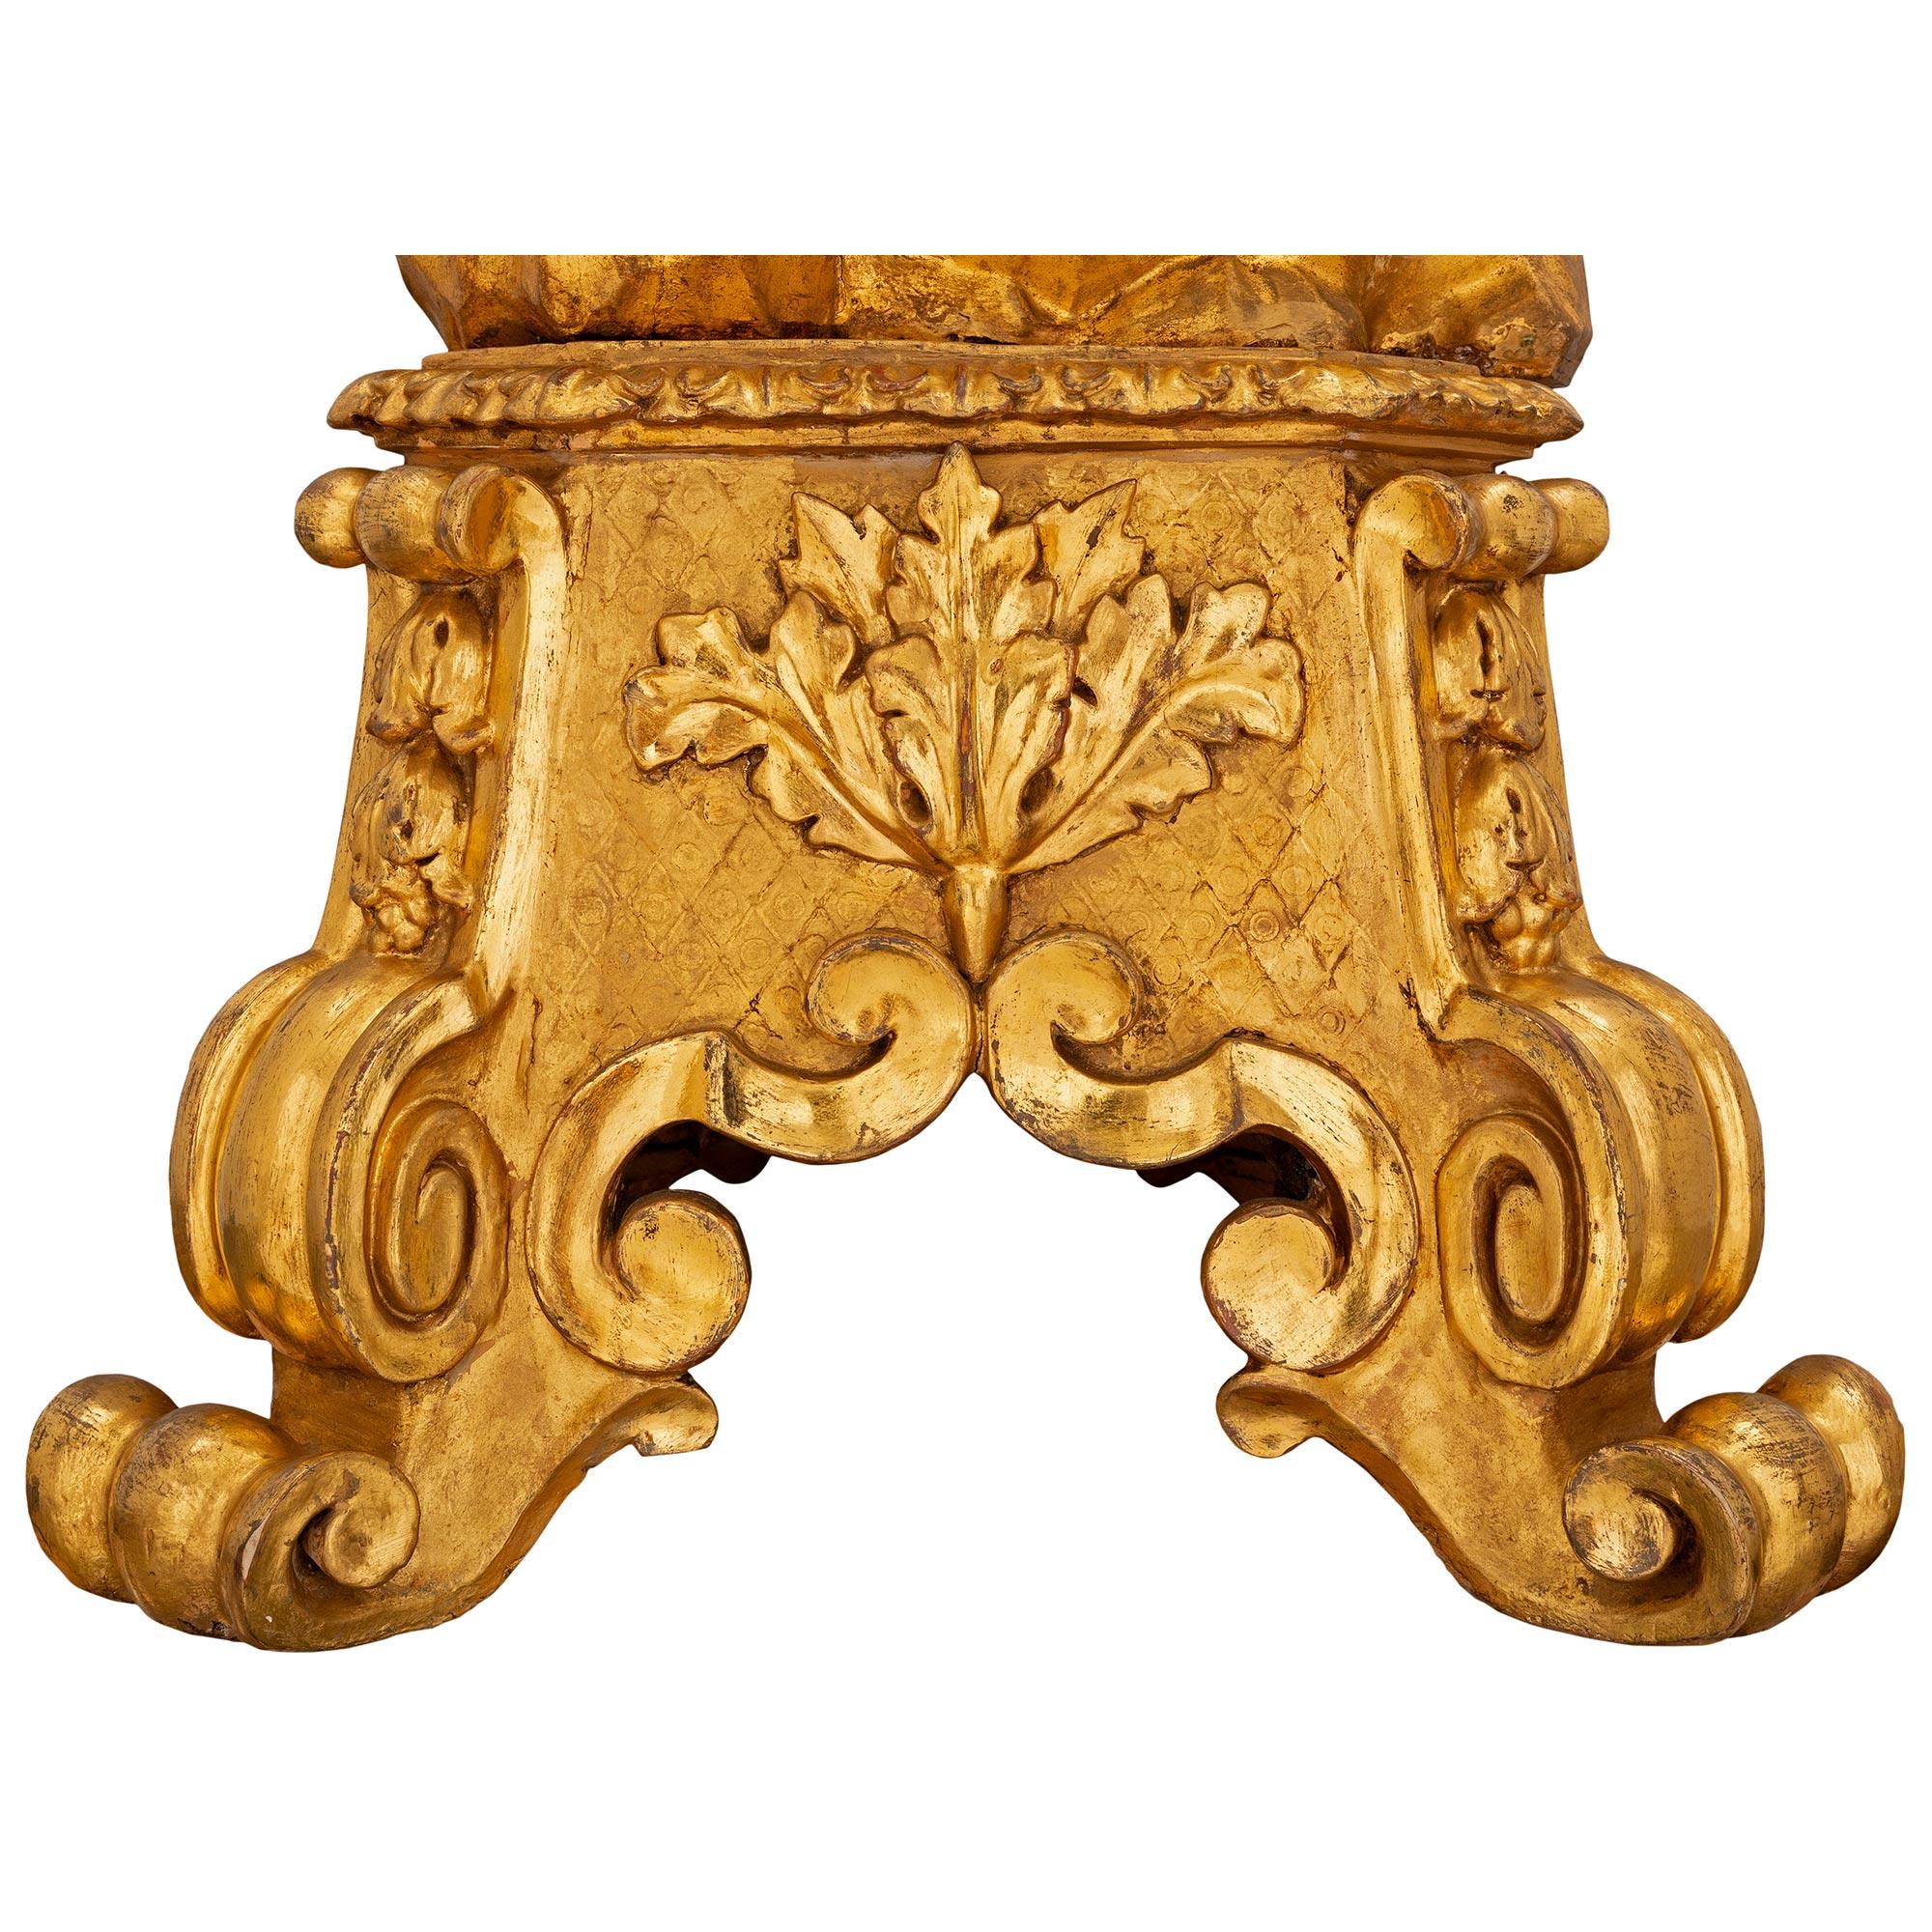 Pair of Italian Late 17th Century Baroque Period Giltwood Torchières For Sale 8